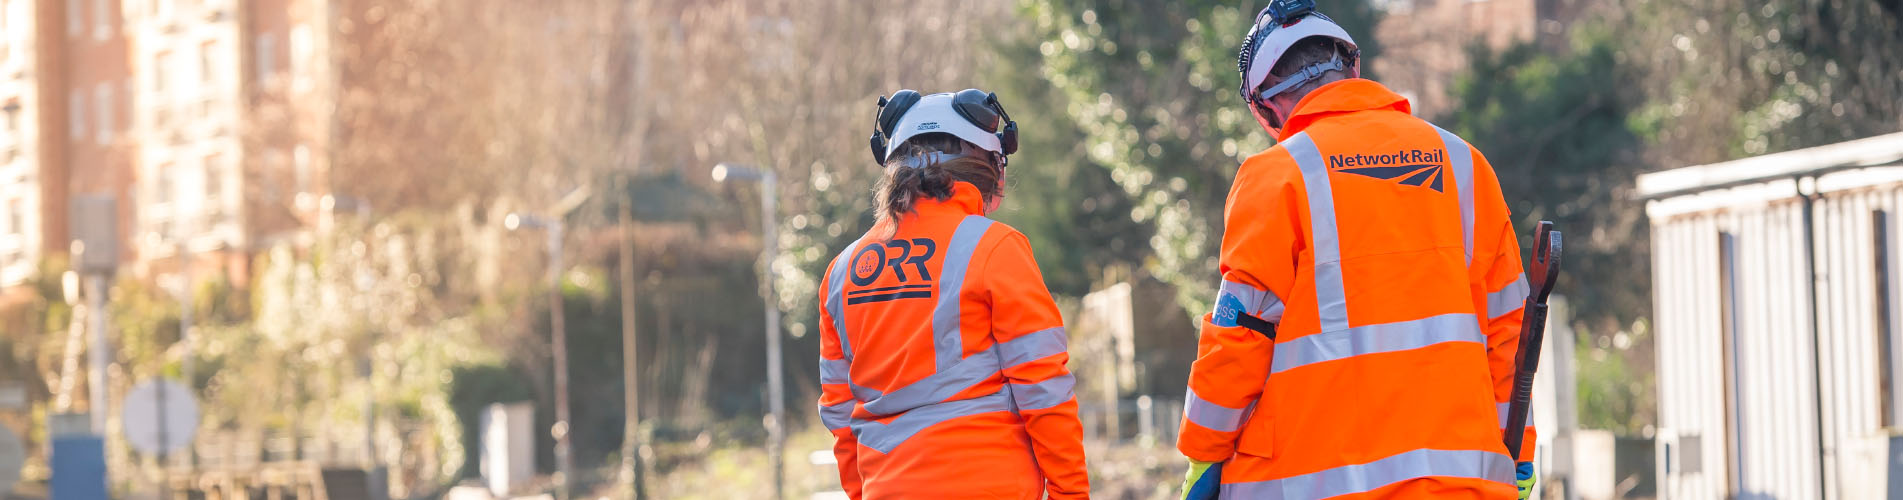 ORR inspector and Network Rail staff out on the railway